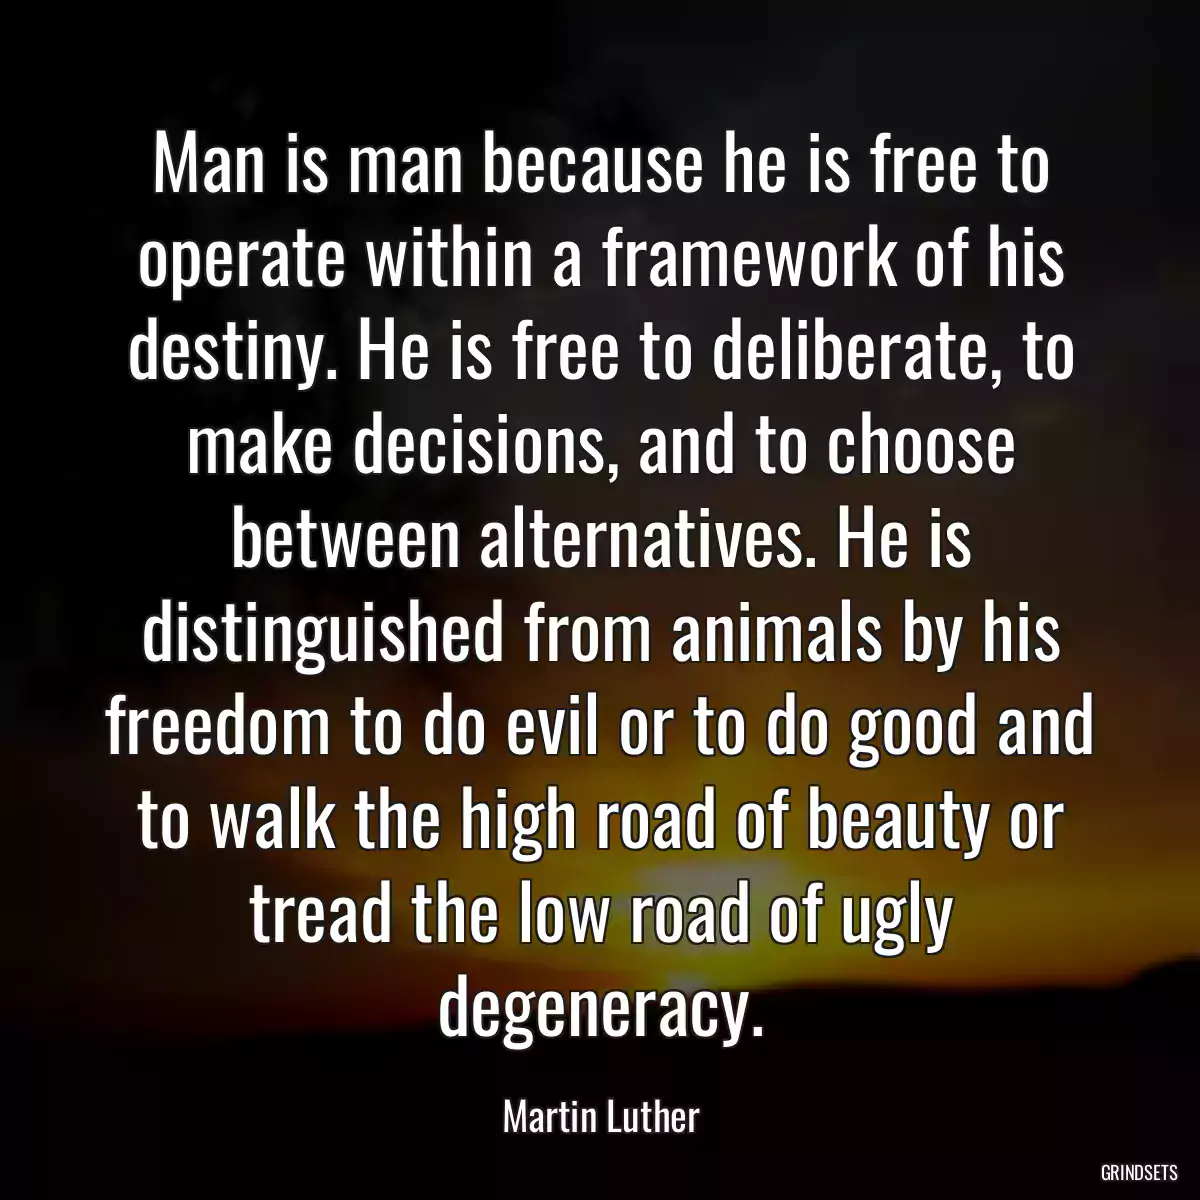 Man is man because he is free to operate within a framework of his destiny. He is free to deliberate, to make decisions, and to choose between alternatives. He is distinguished from animals by his freedom to do evil or to do good and to walk the high road of beauty or tread the low road of ugly degeneracy.